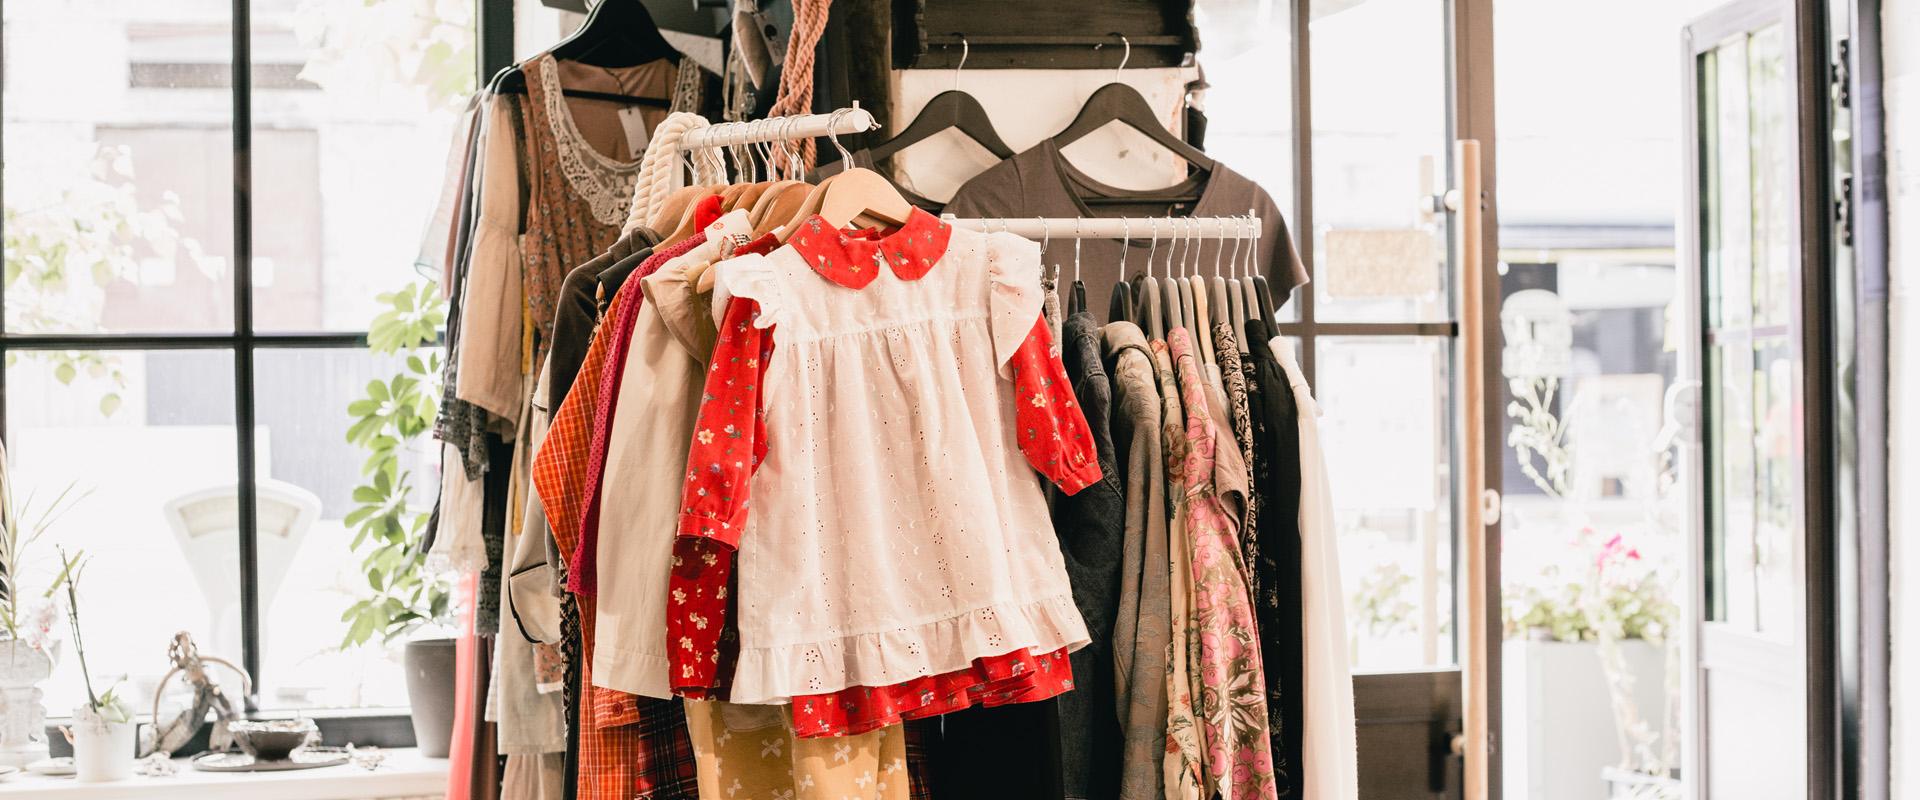 Vintage and retro clothes for children, men, and women